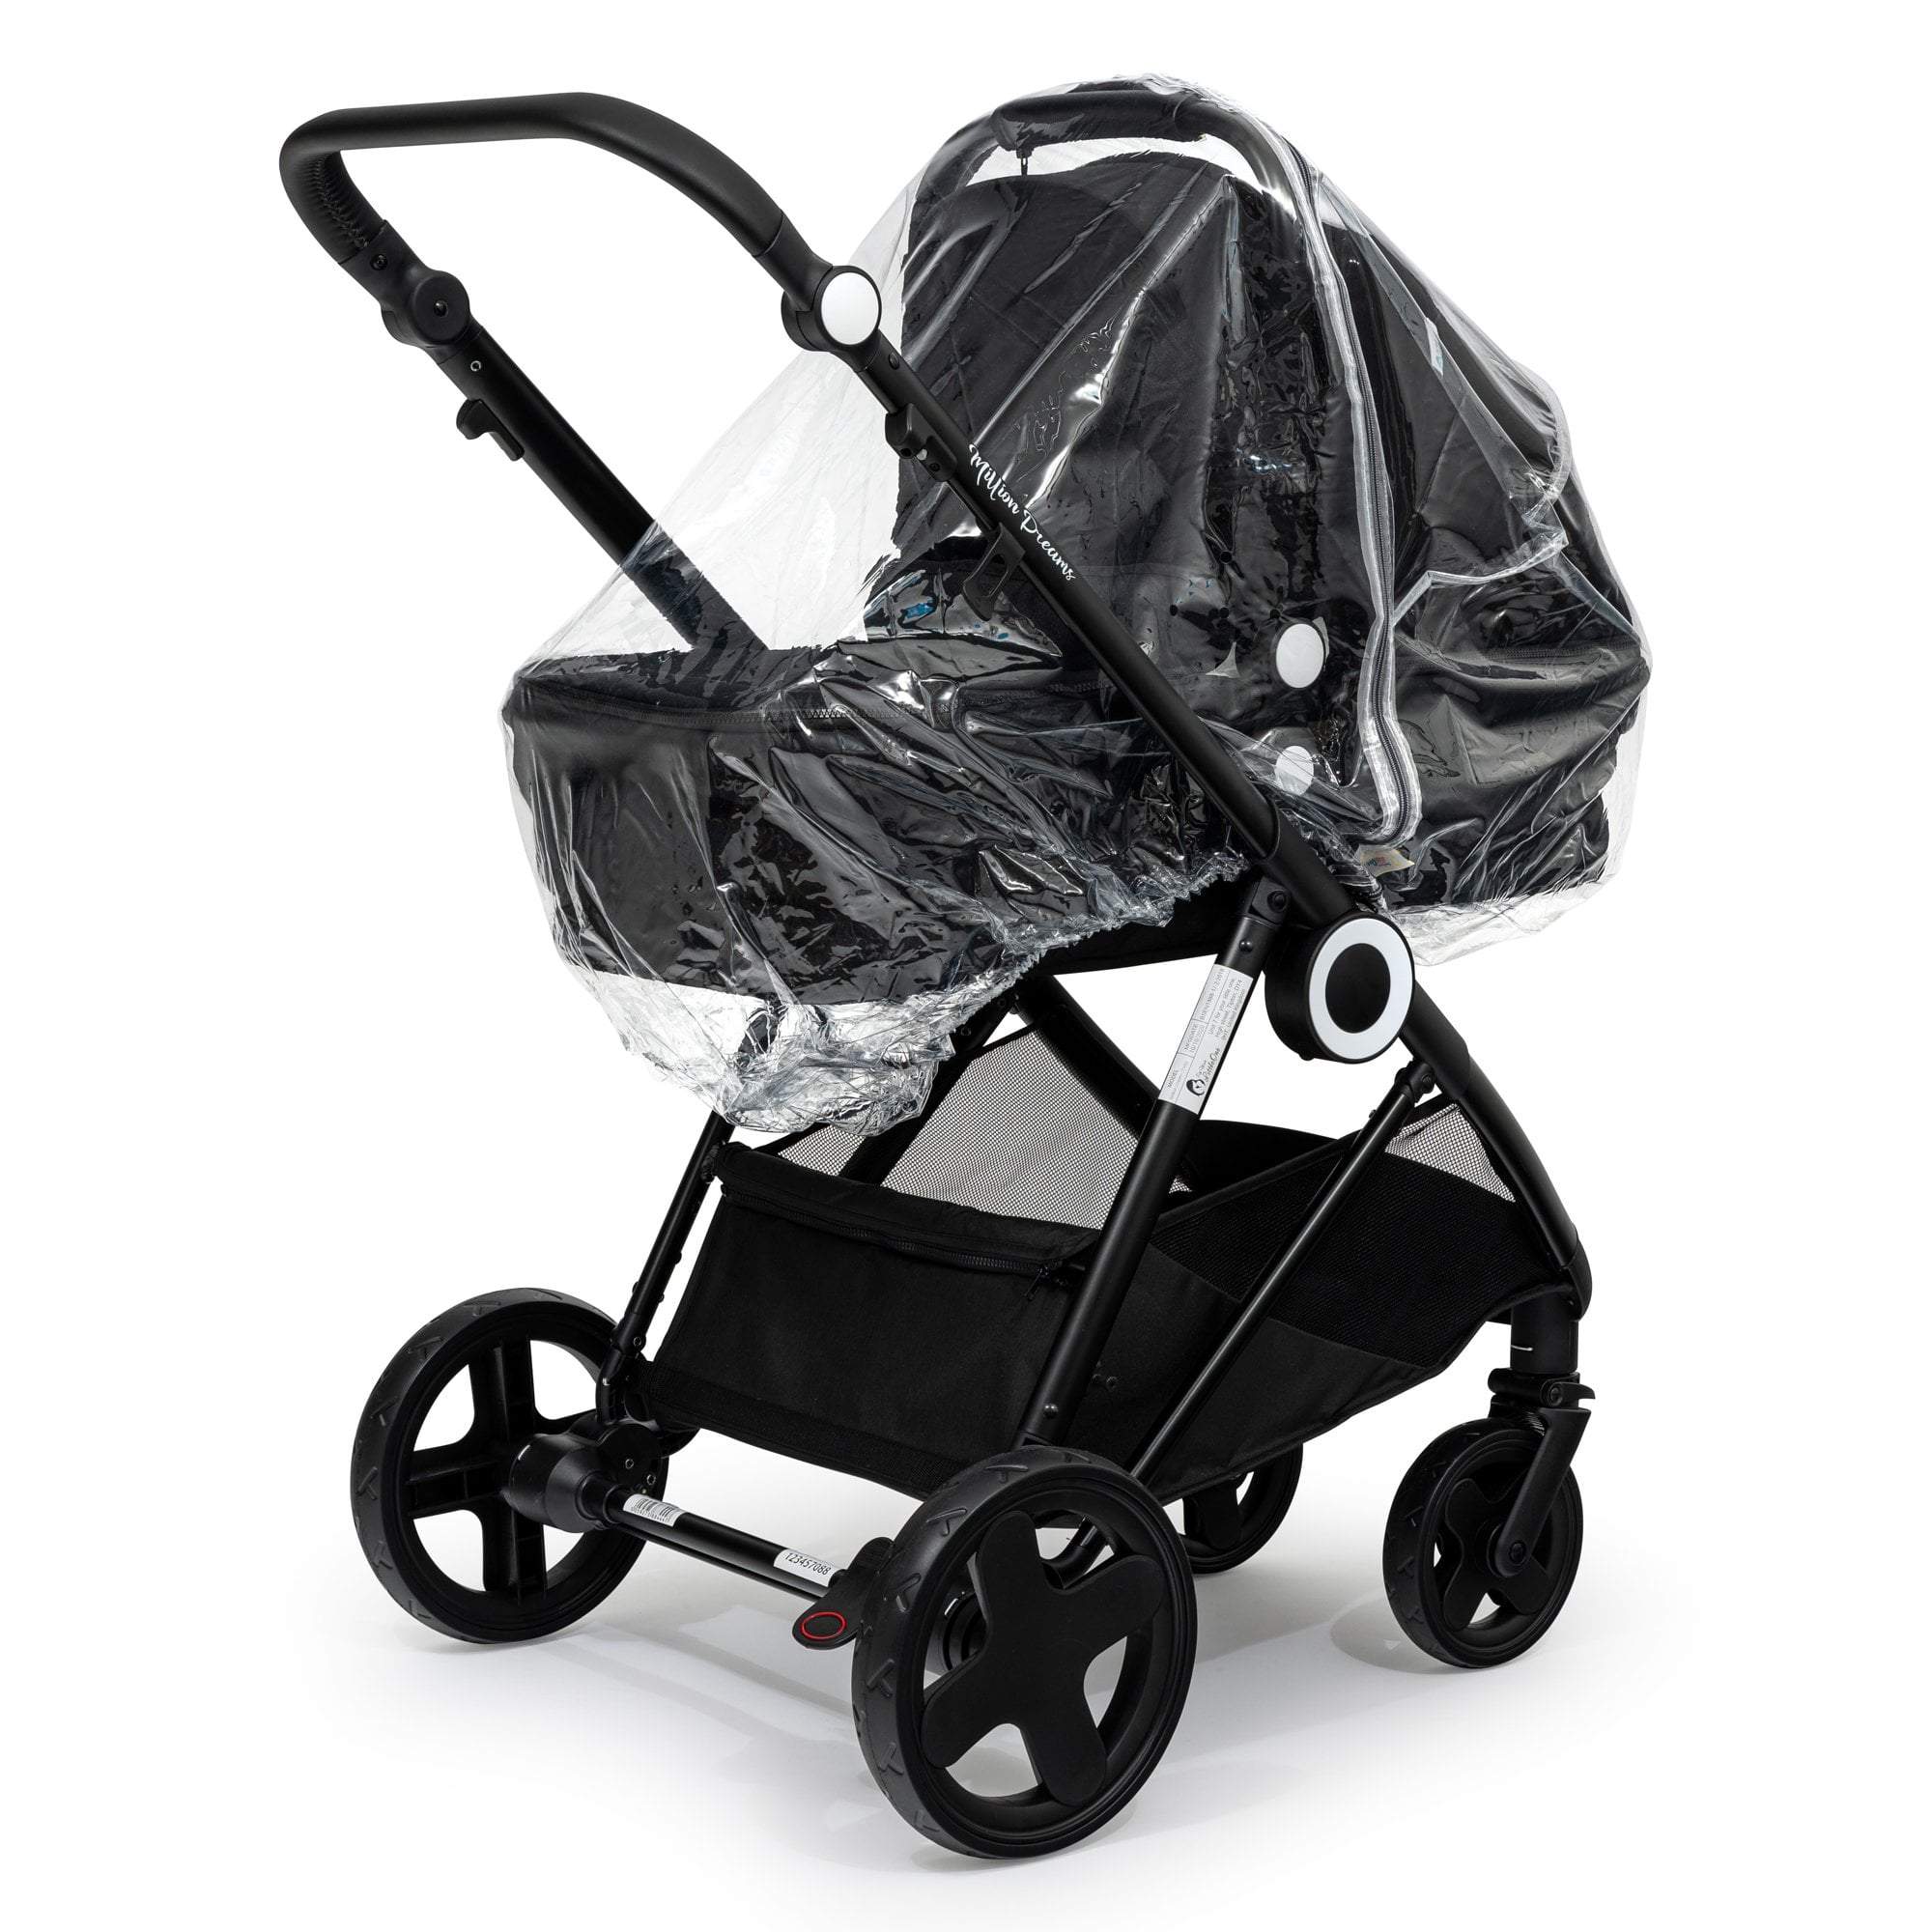 Carrycot Raincover Compatible With Graco - Fits All Models - For Your Little One